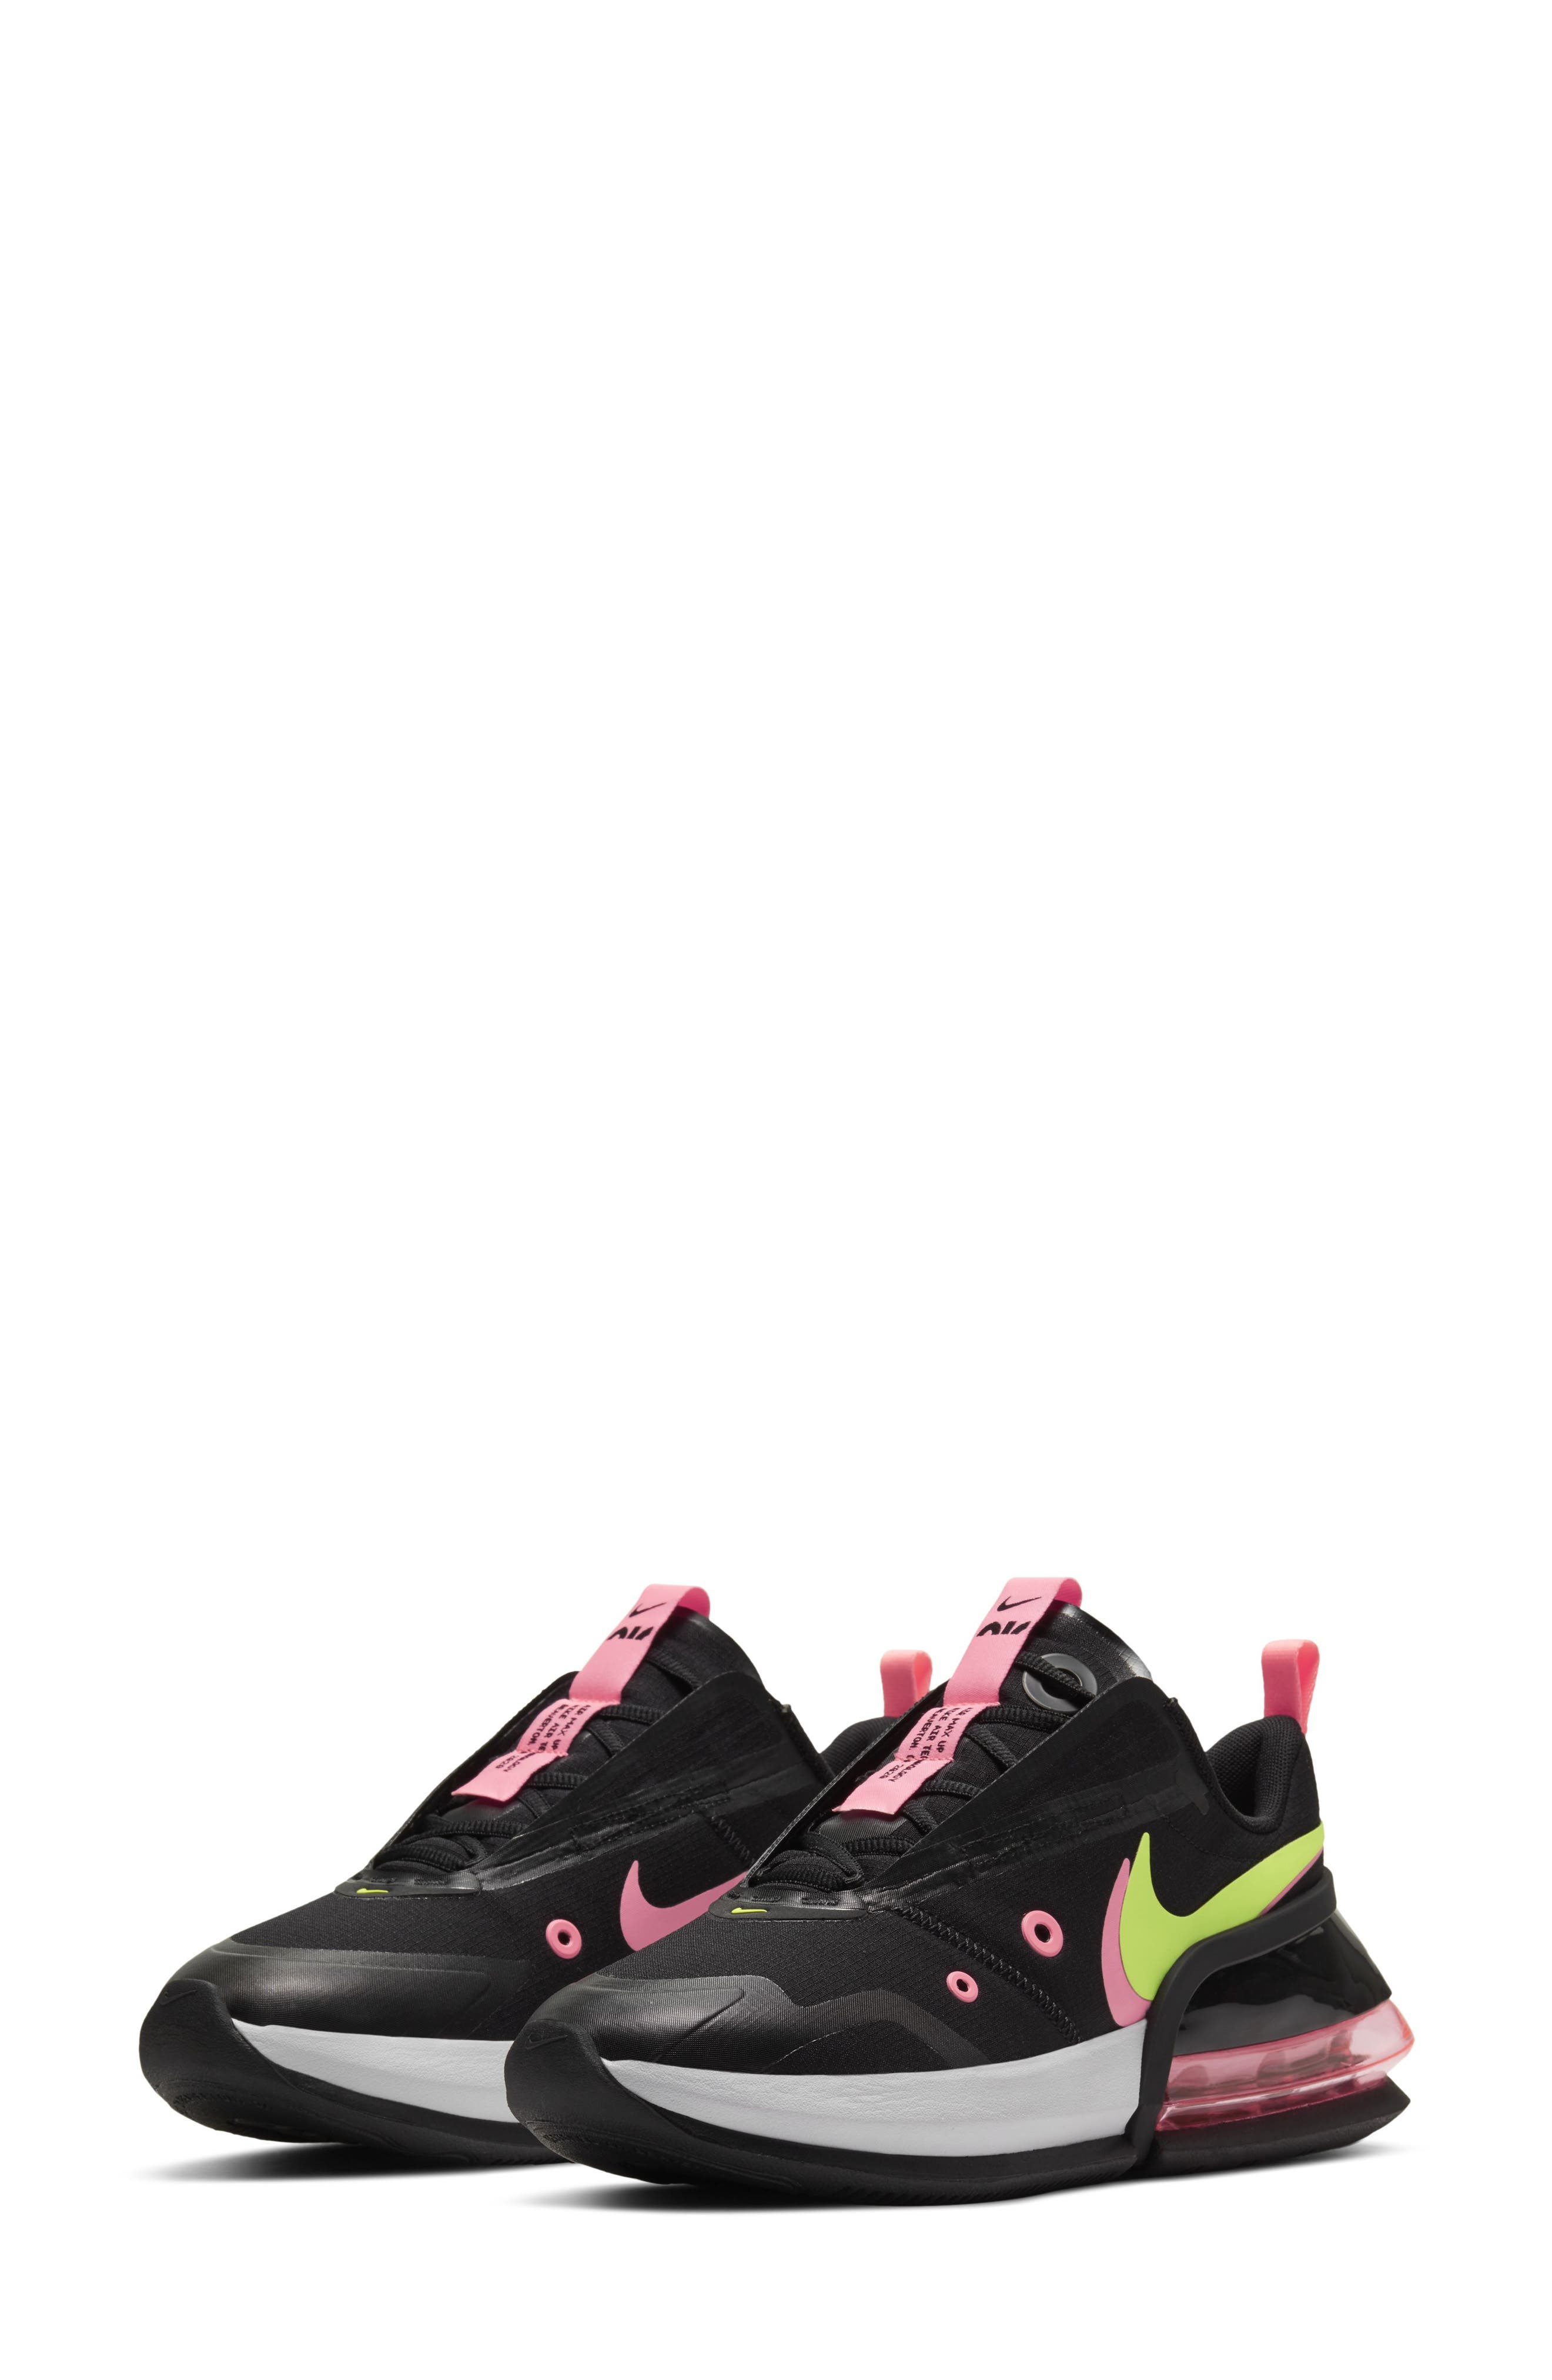 where can i buy nike shoes online cheap